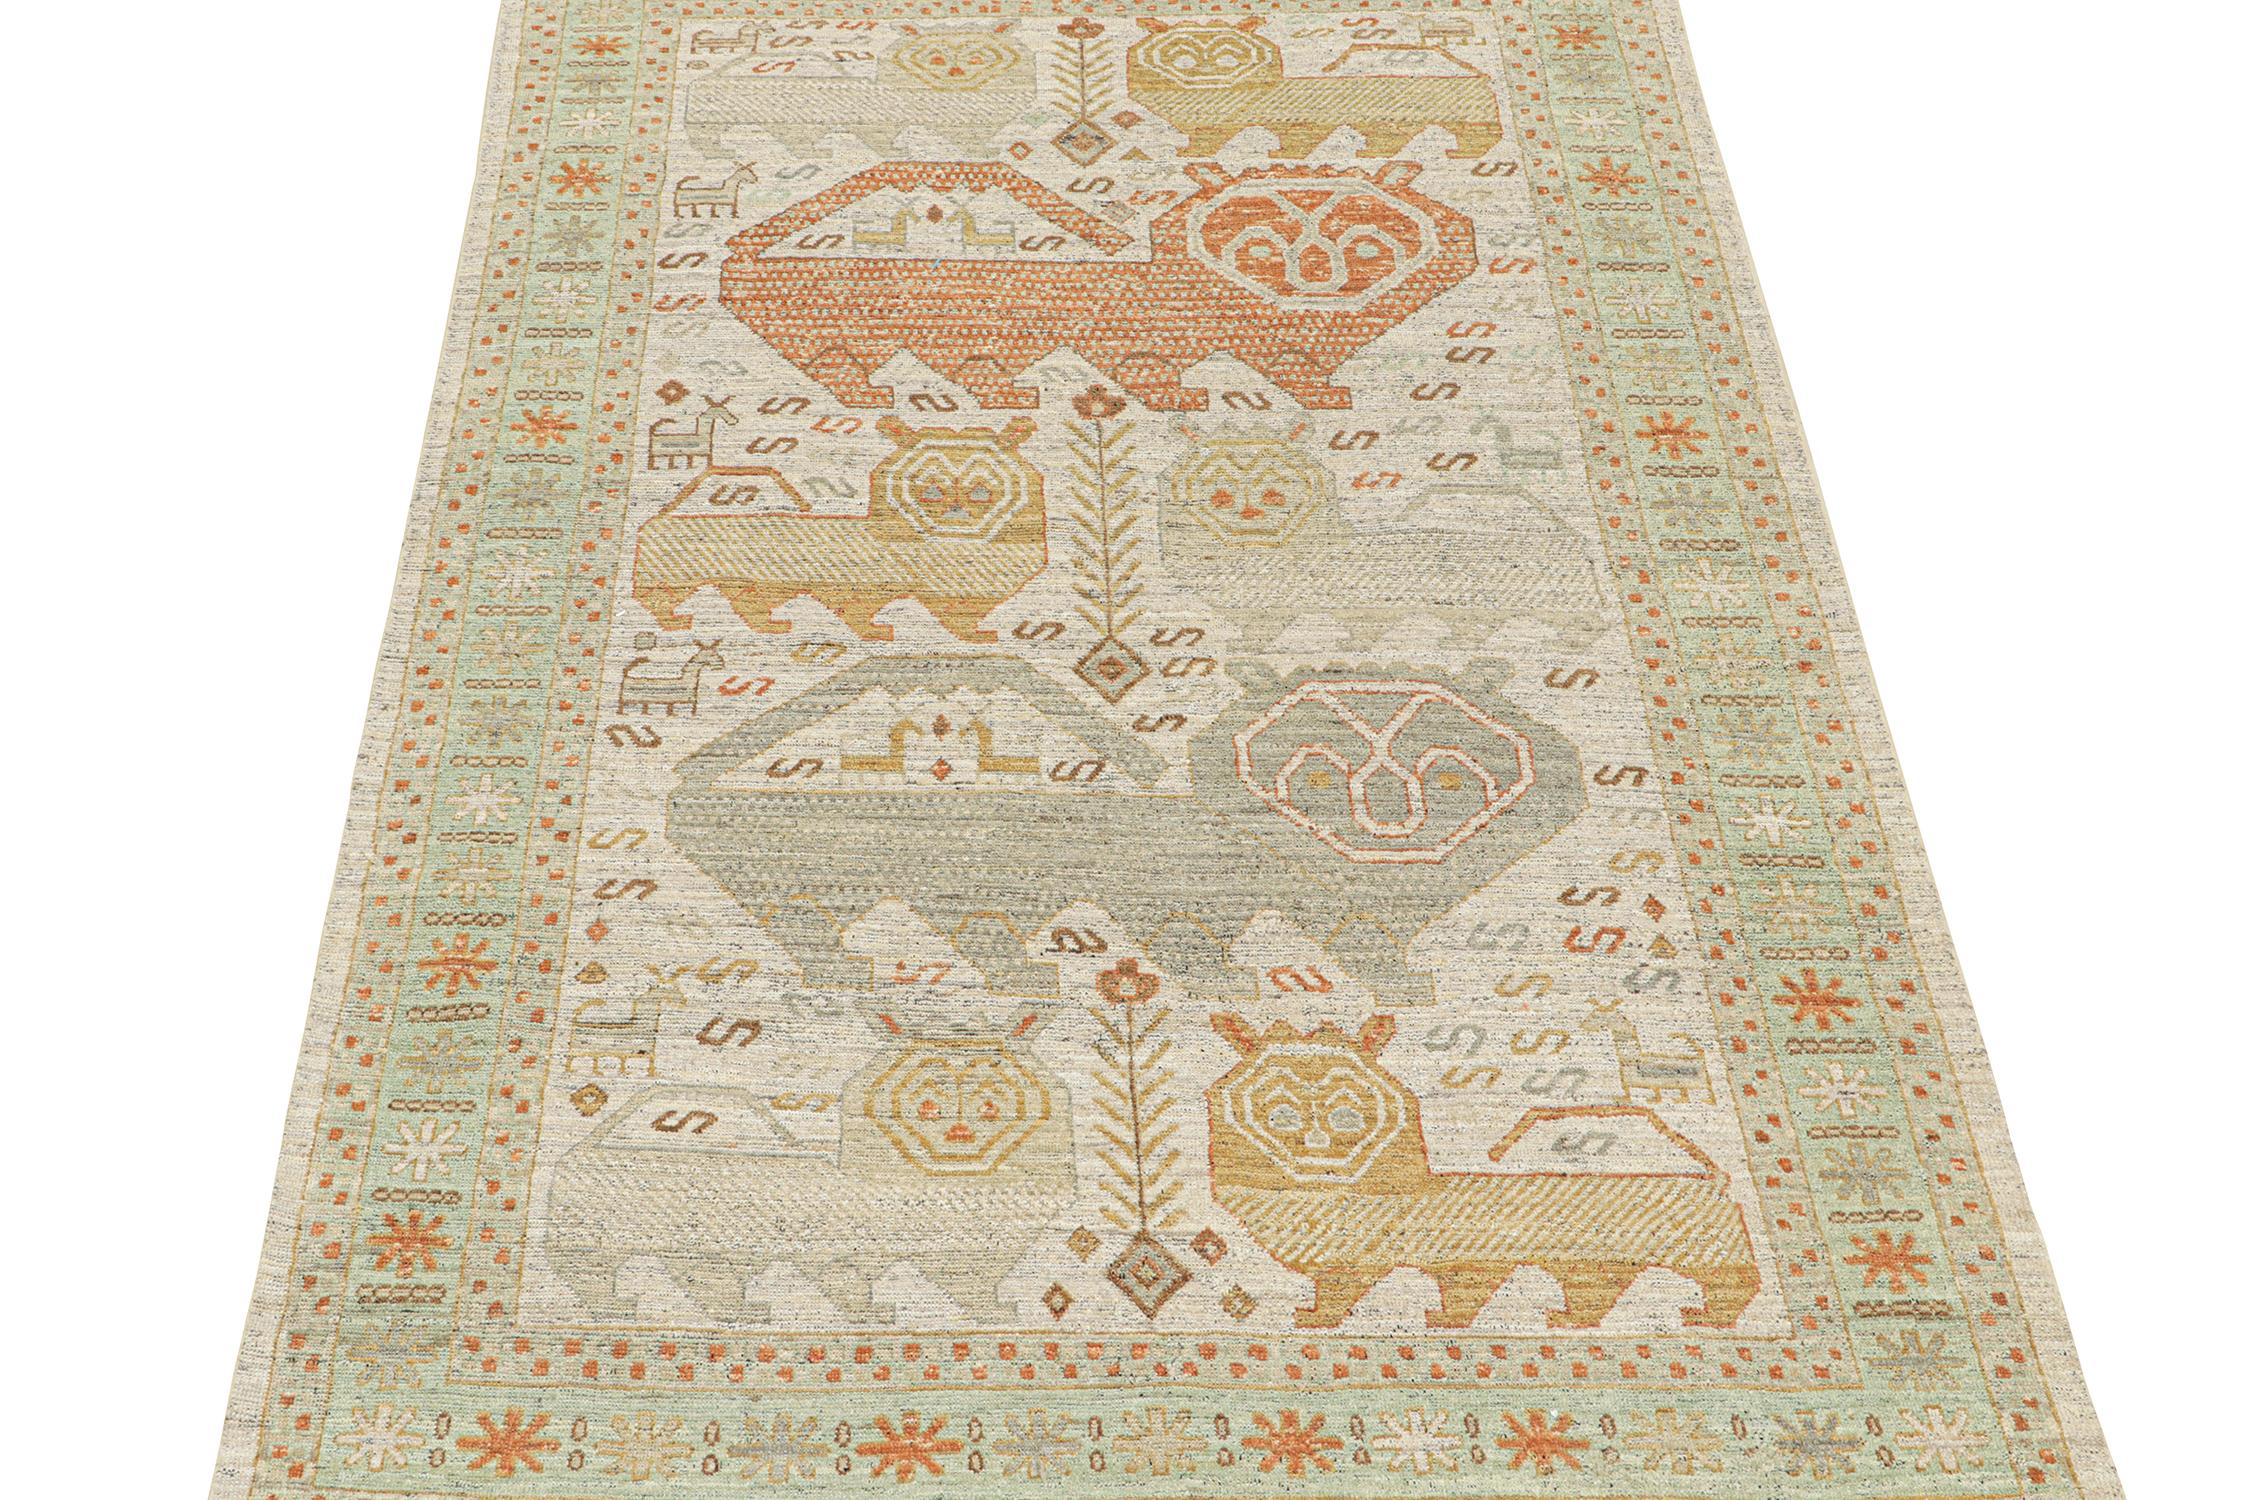 This 6x9 rug is a new addition to the Burano Collection by Rug & Kilim. Hand-knotted in wool, its design explores Caucasian tribal rug aesthetics in a refreshing modern quality.

On the Design: 

The design draws on tribal animal pictorials in